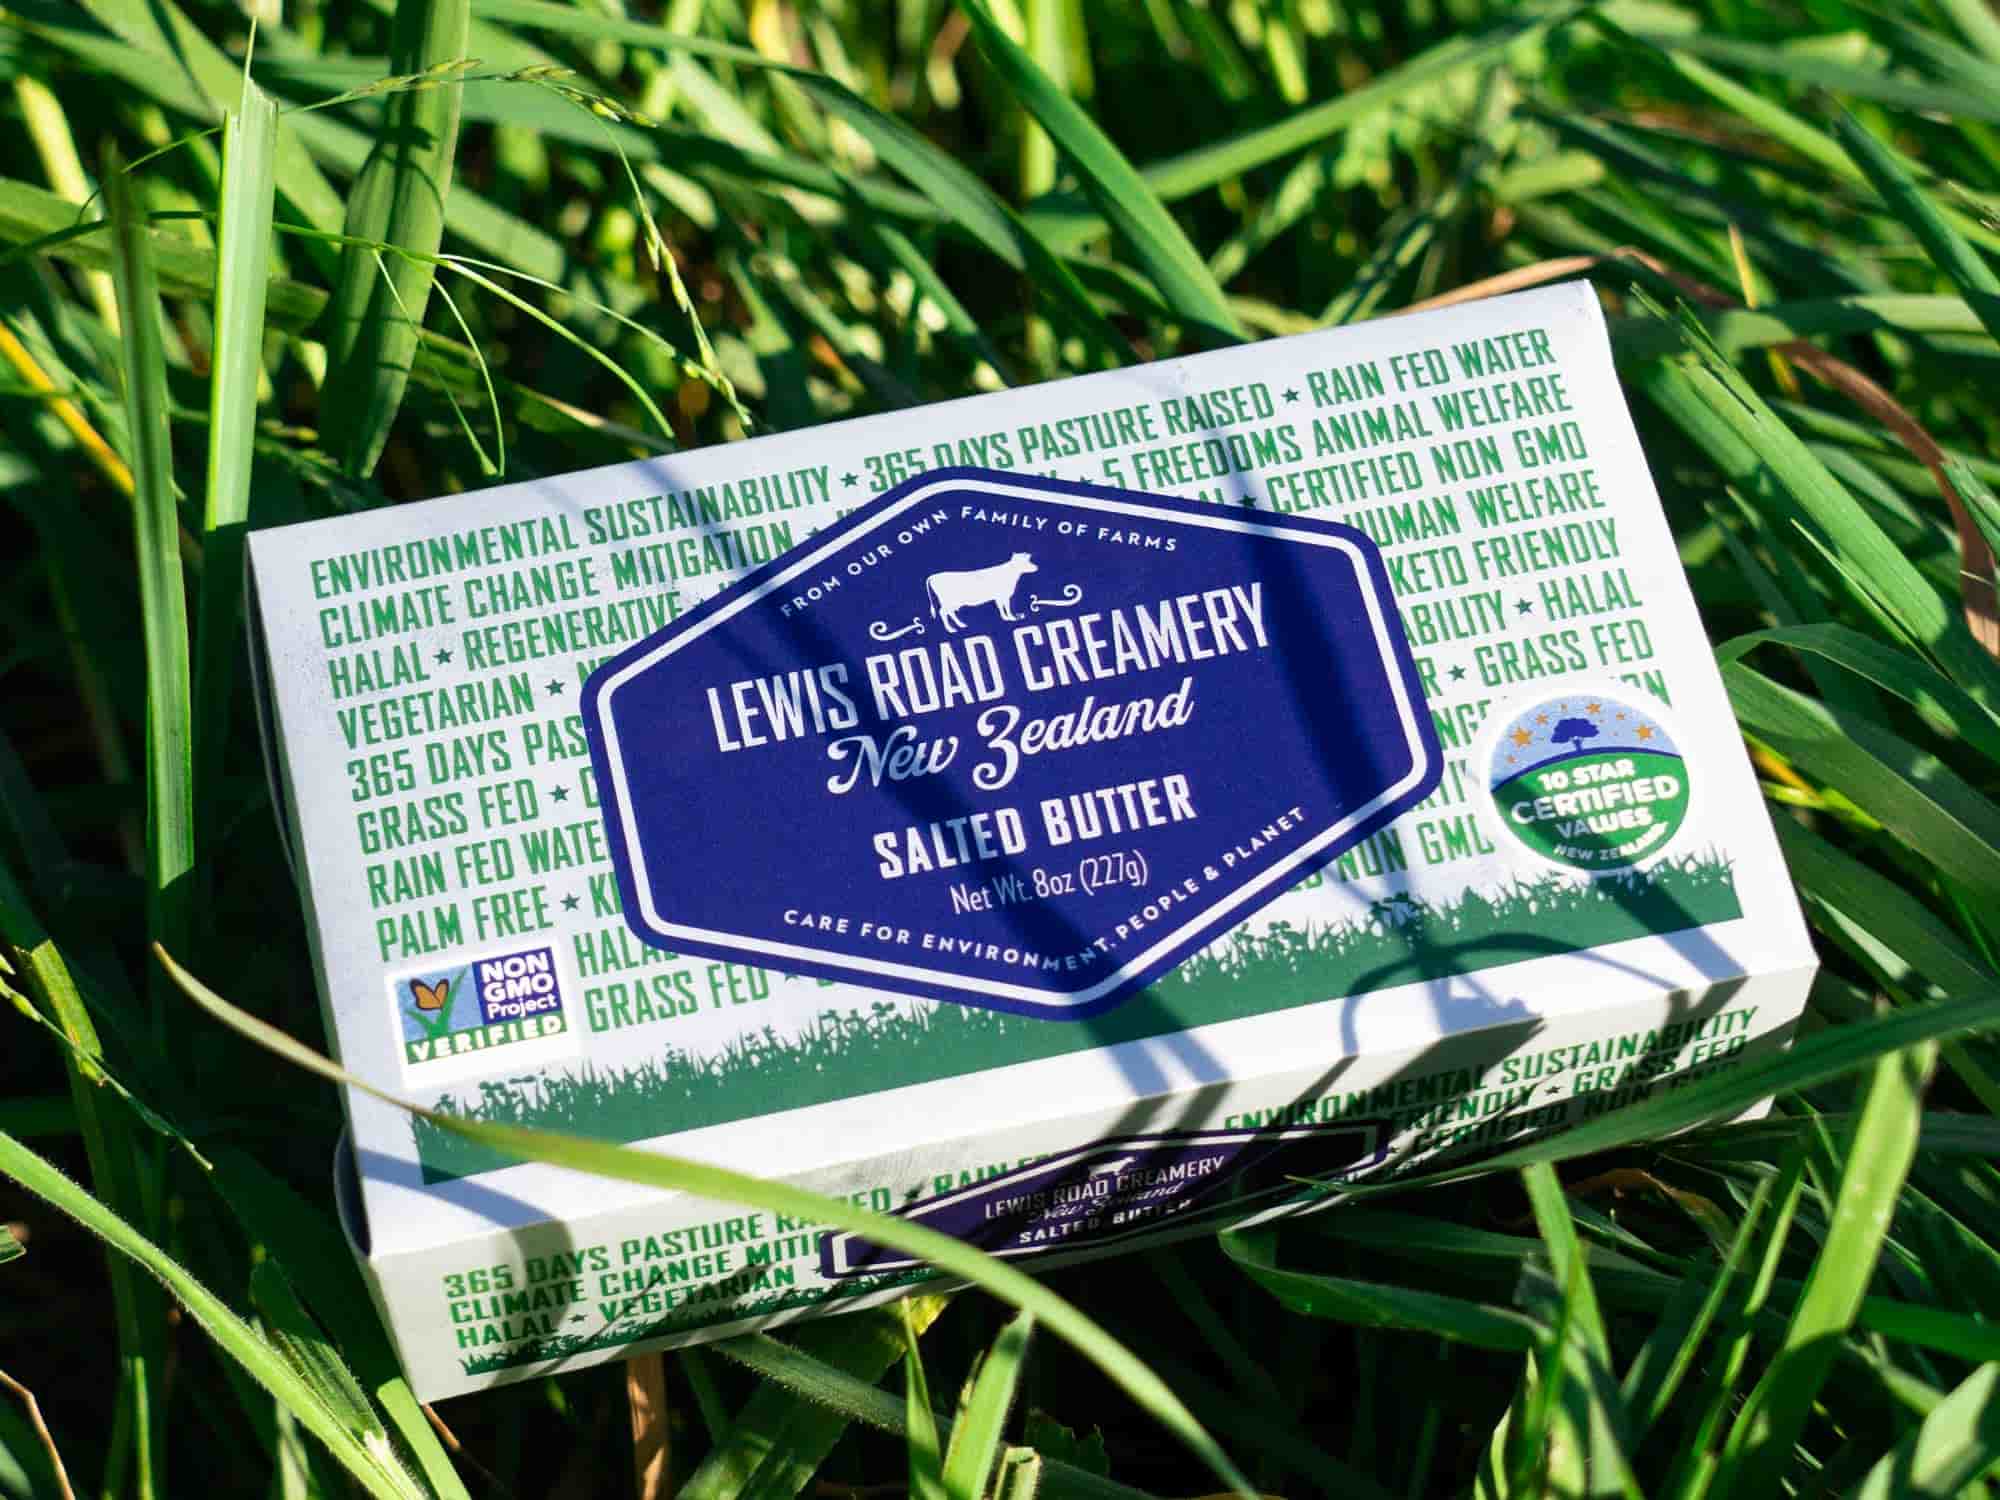 Lewis Road Creamery salted butter